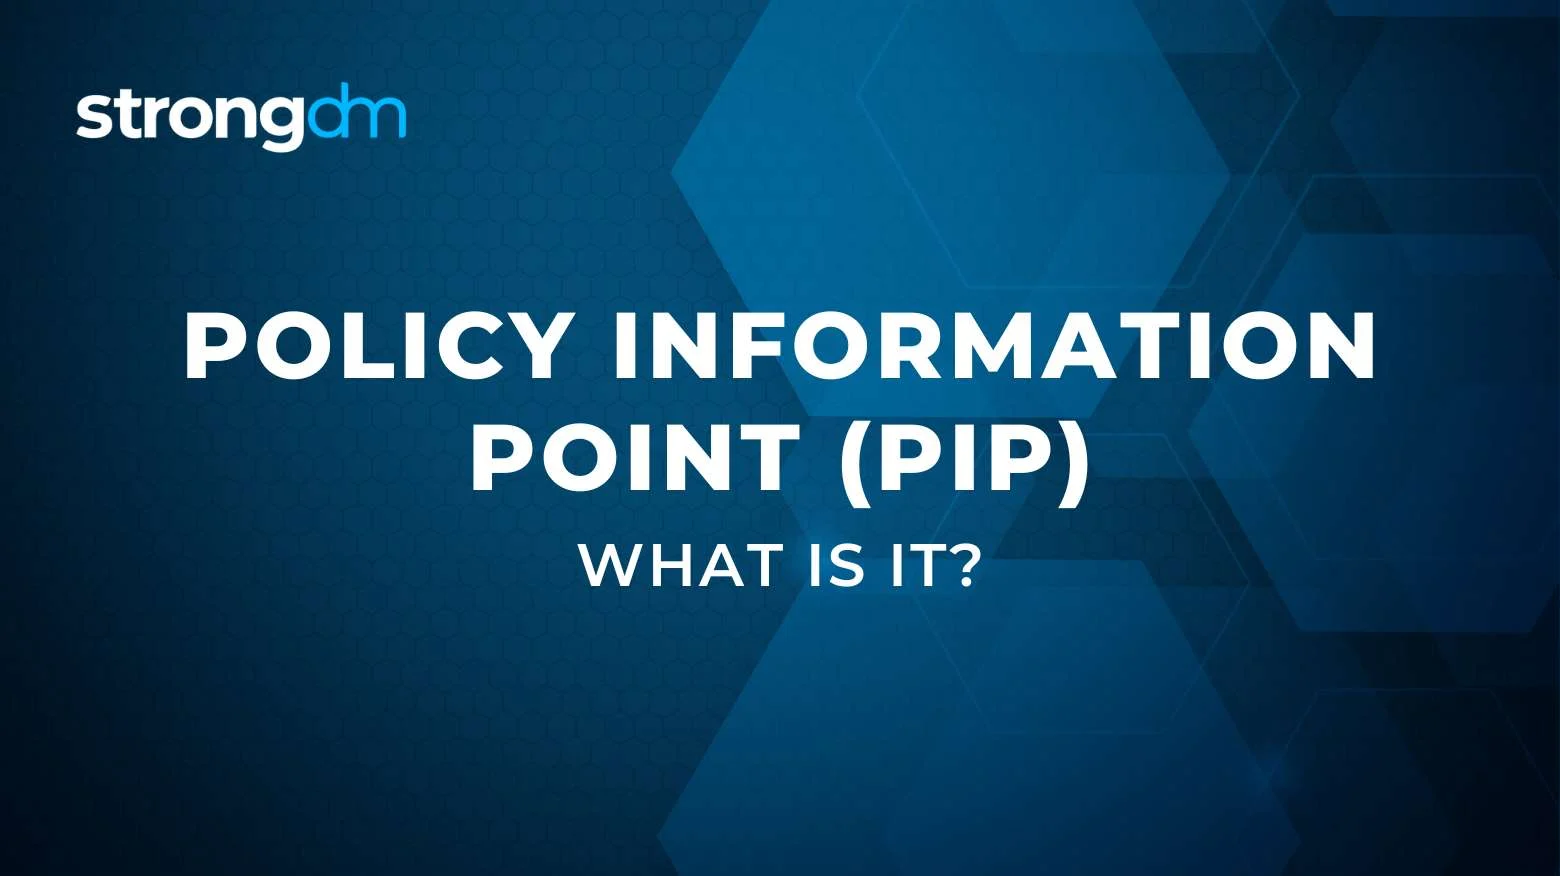 What Is a Policy Information Point (PIP)?